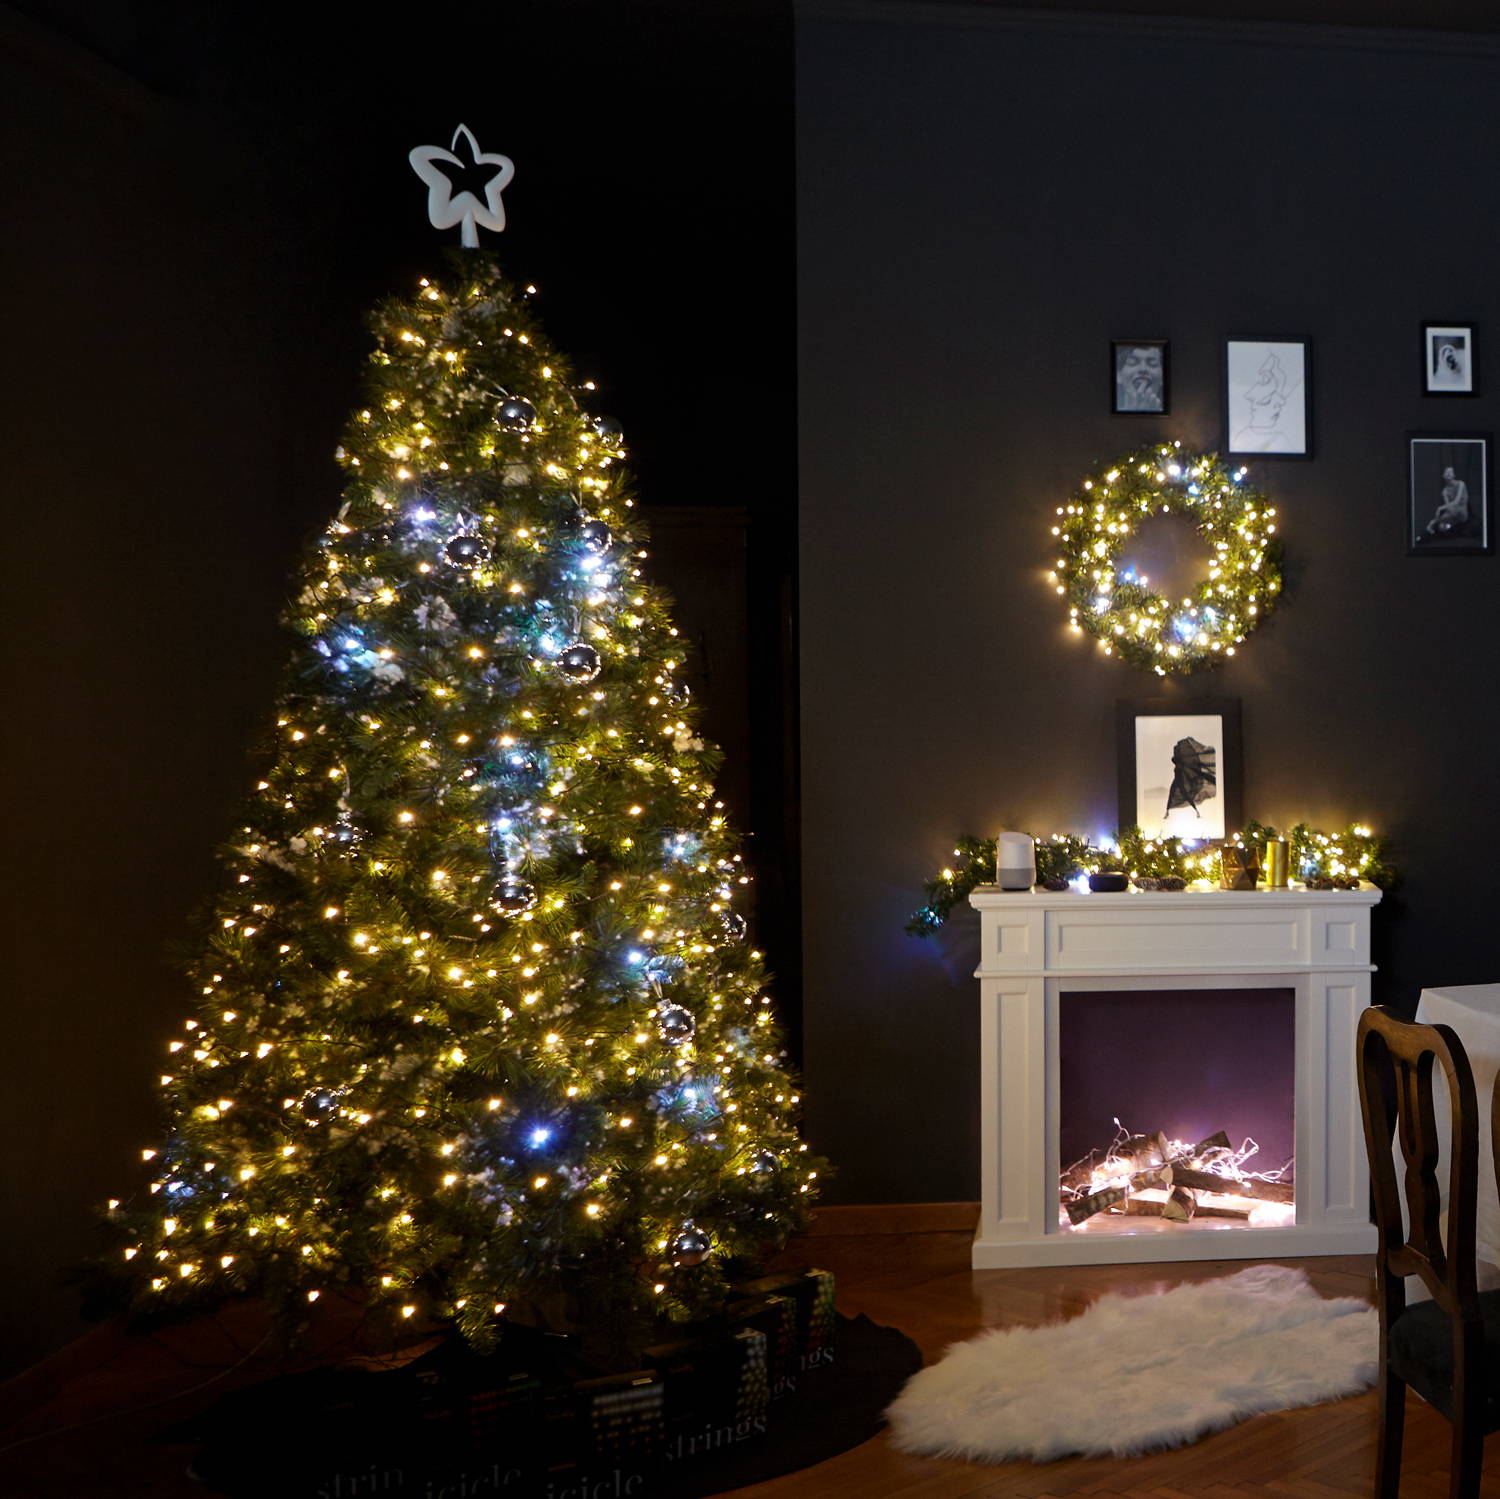 Gold edition Twinkly string lighting adorning Christmas tree, wreath and garland in living room